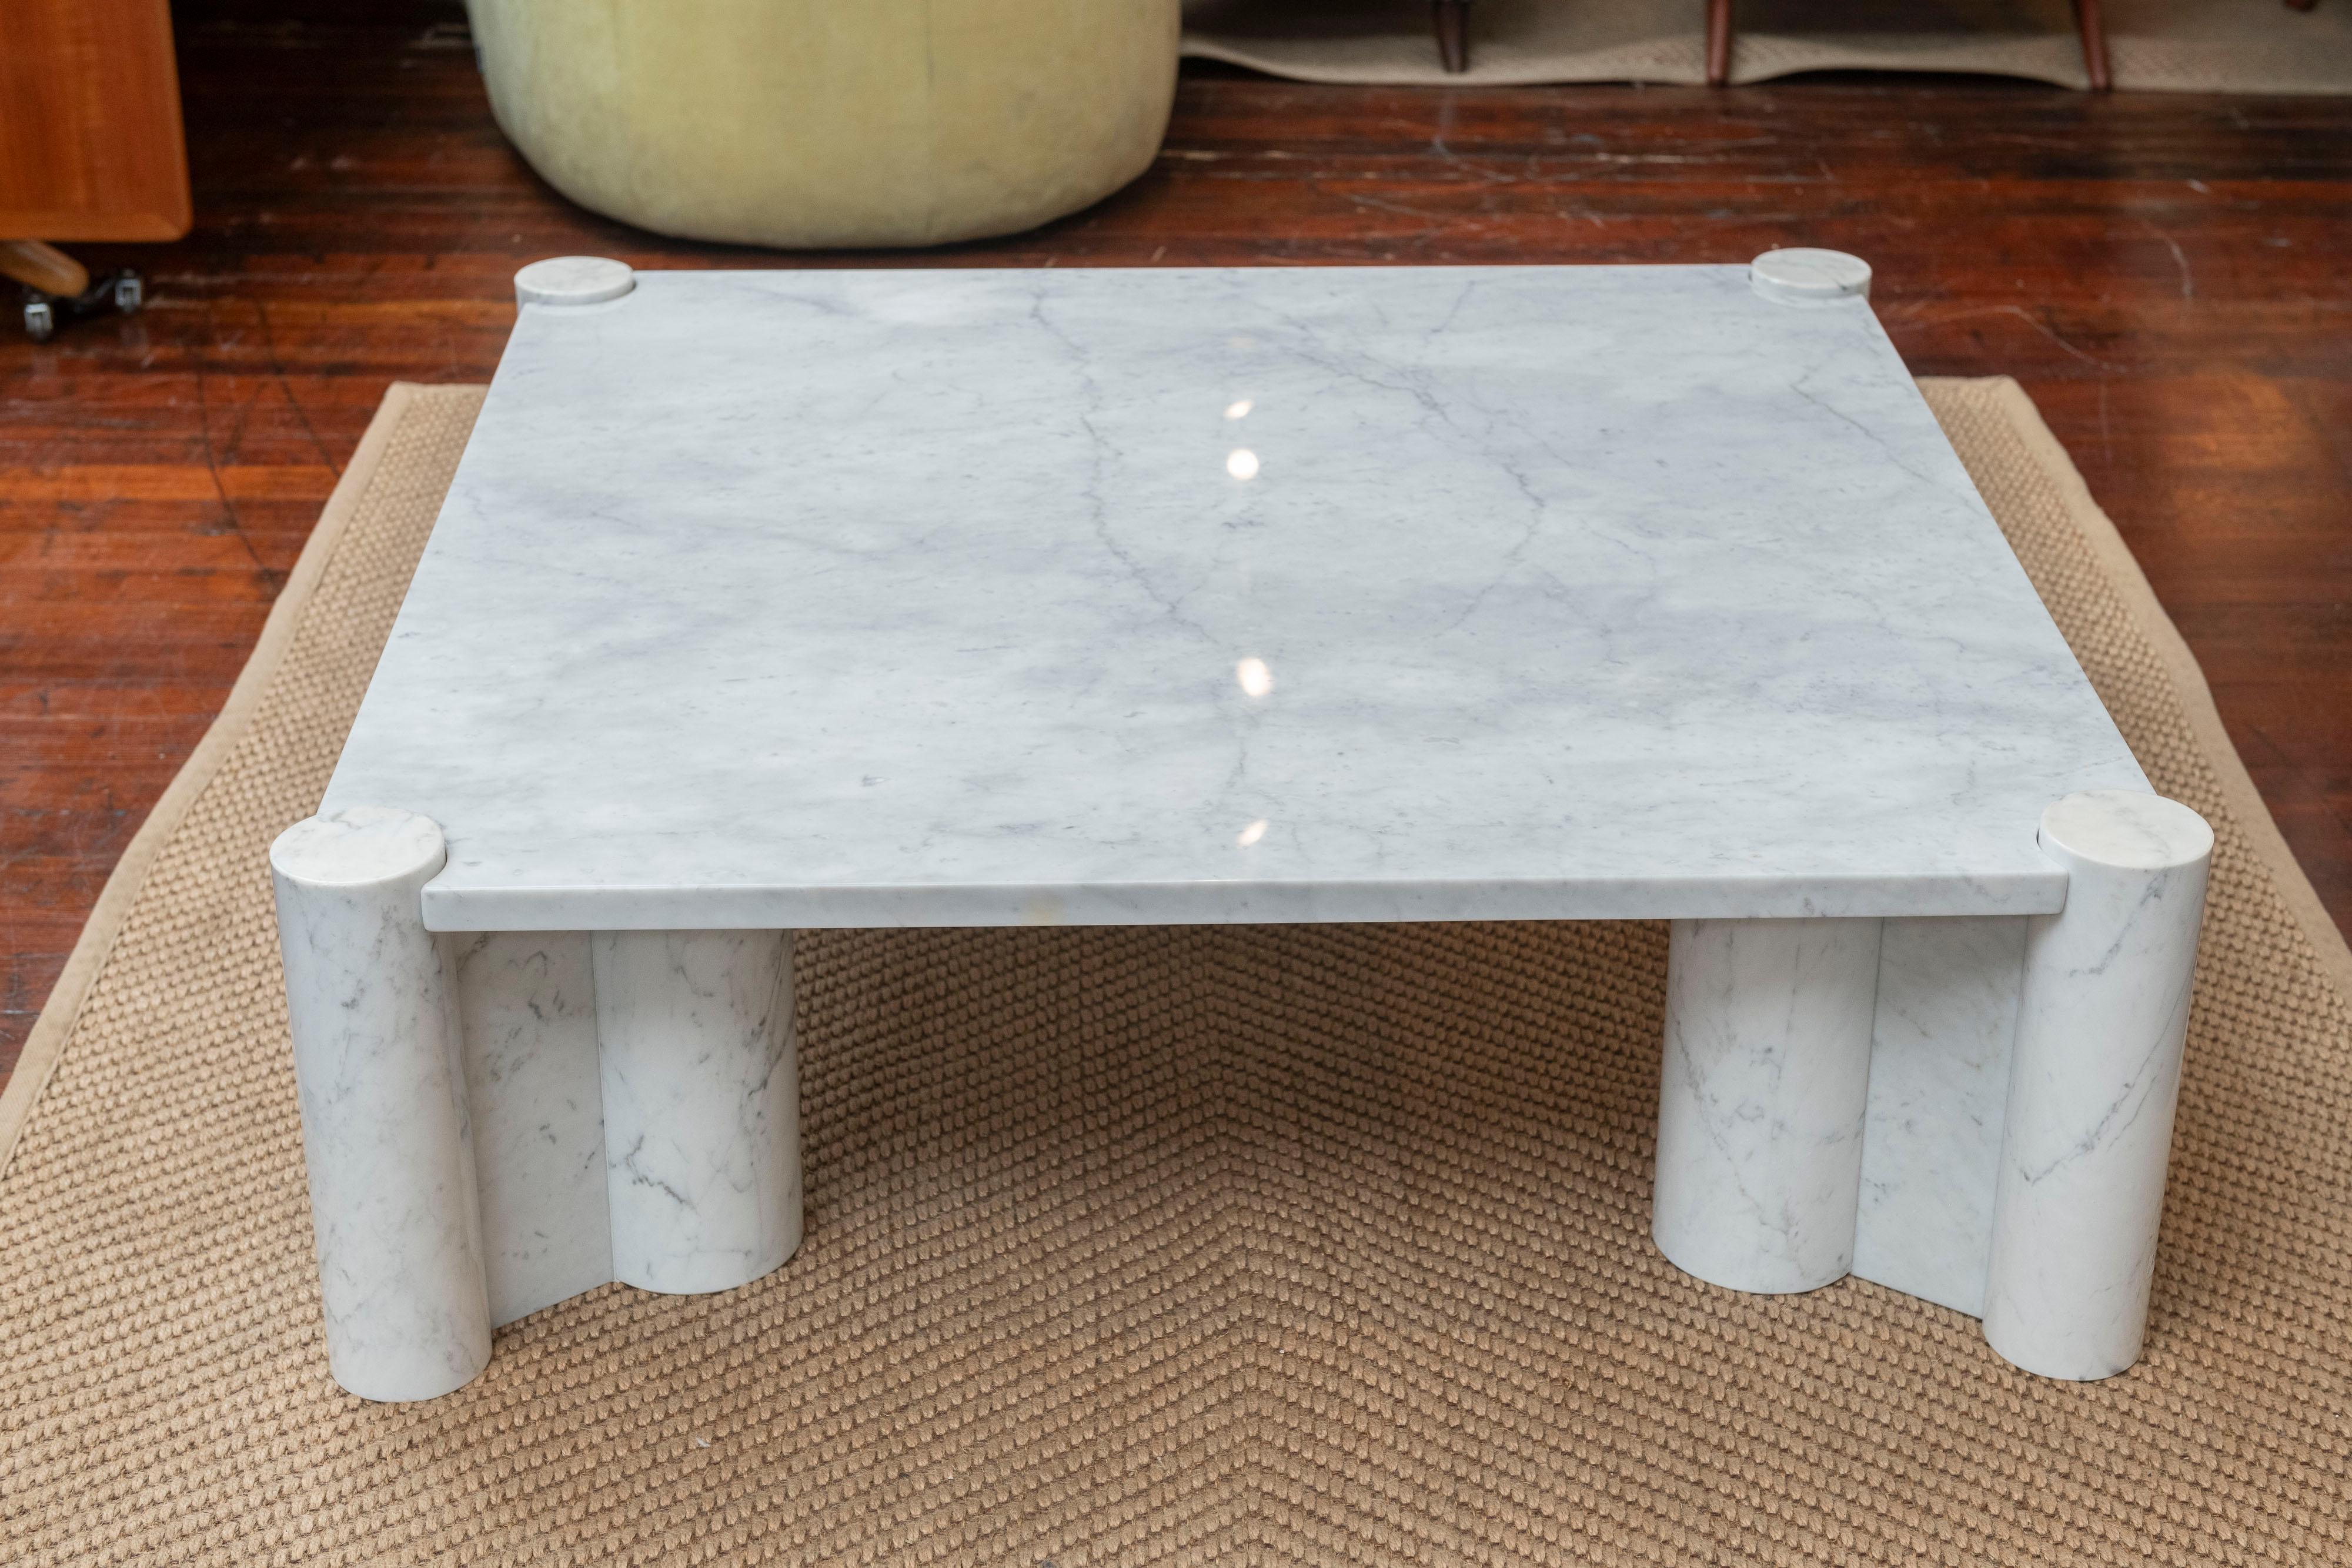 Gae Aulenti Jumbo coffee table for Knoll. Architect and designer Gae Aulenti's Jumbo coffee table is her most iconic creation made from honed white Carrera marble in Italy, this table is the epitome of cool. Simple and sophisticated the table comes